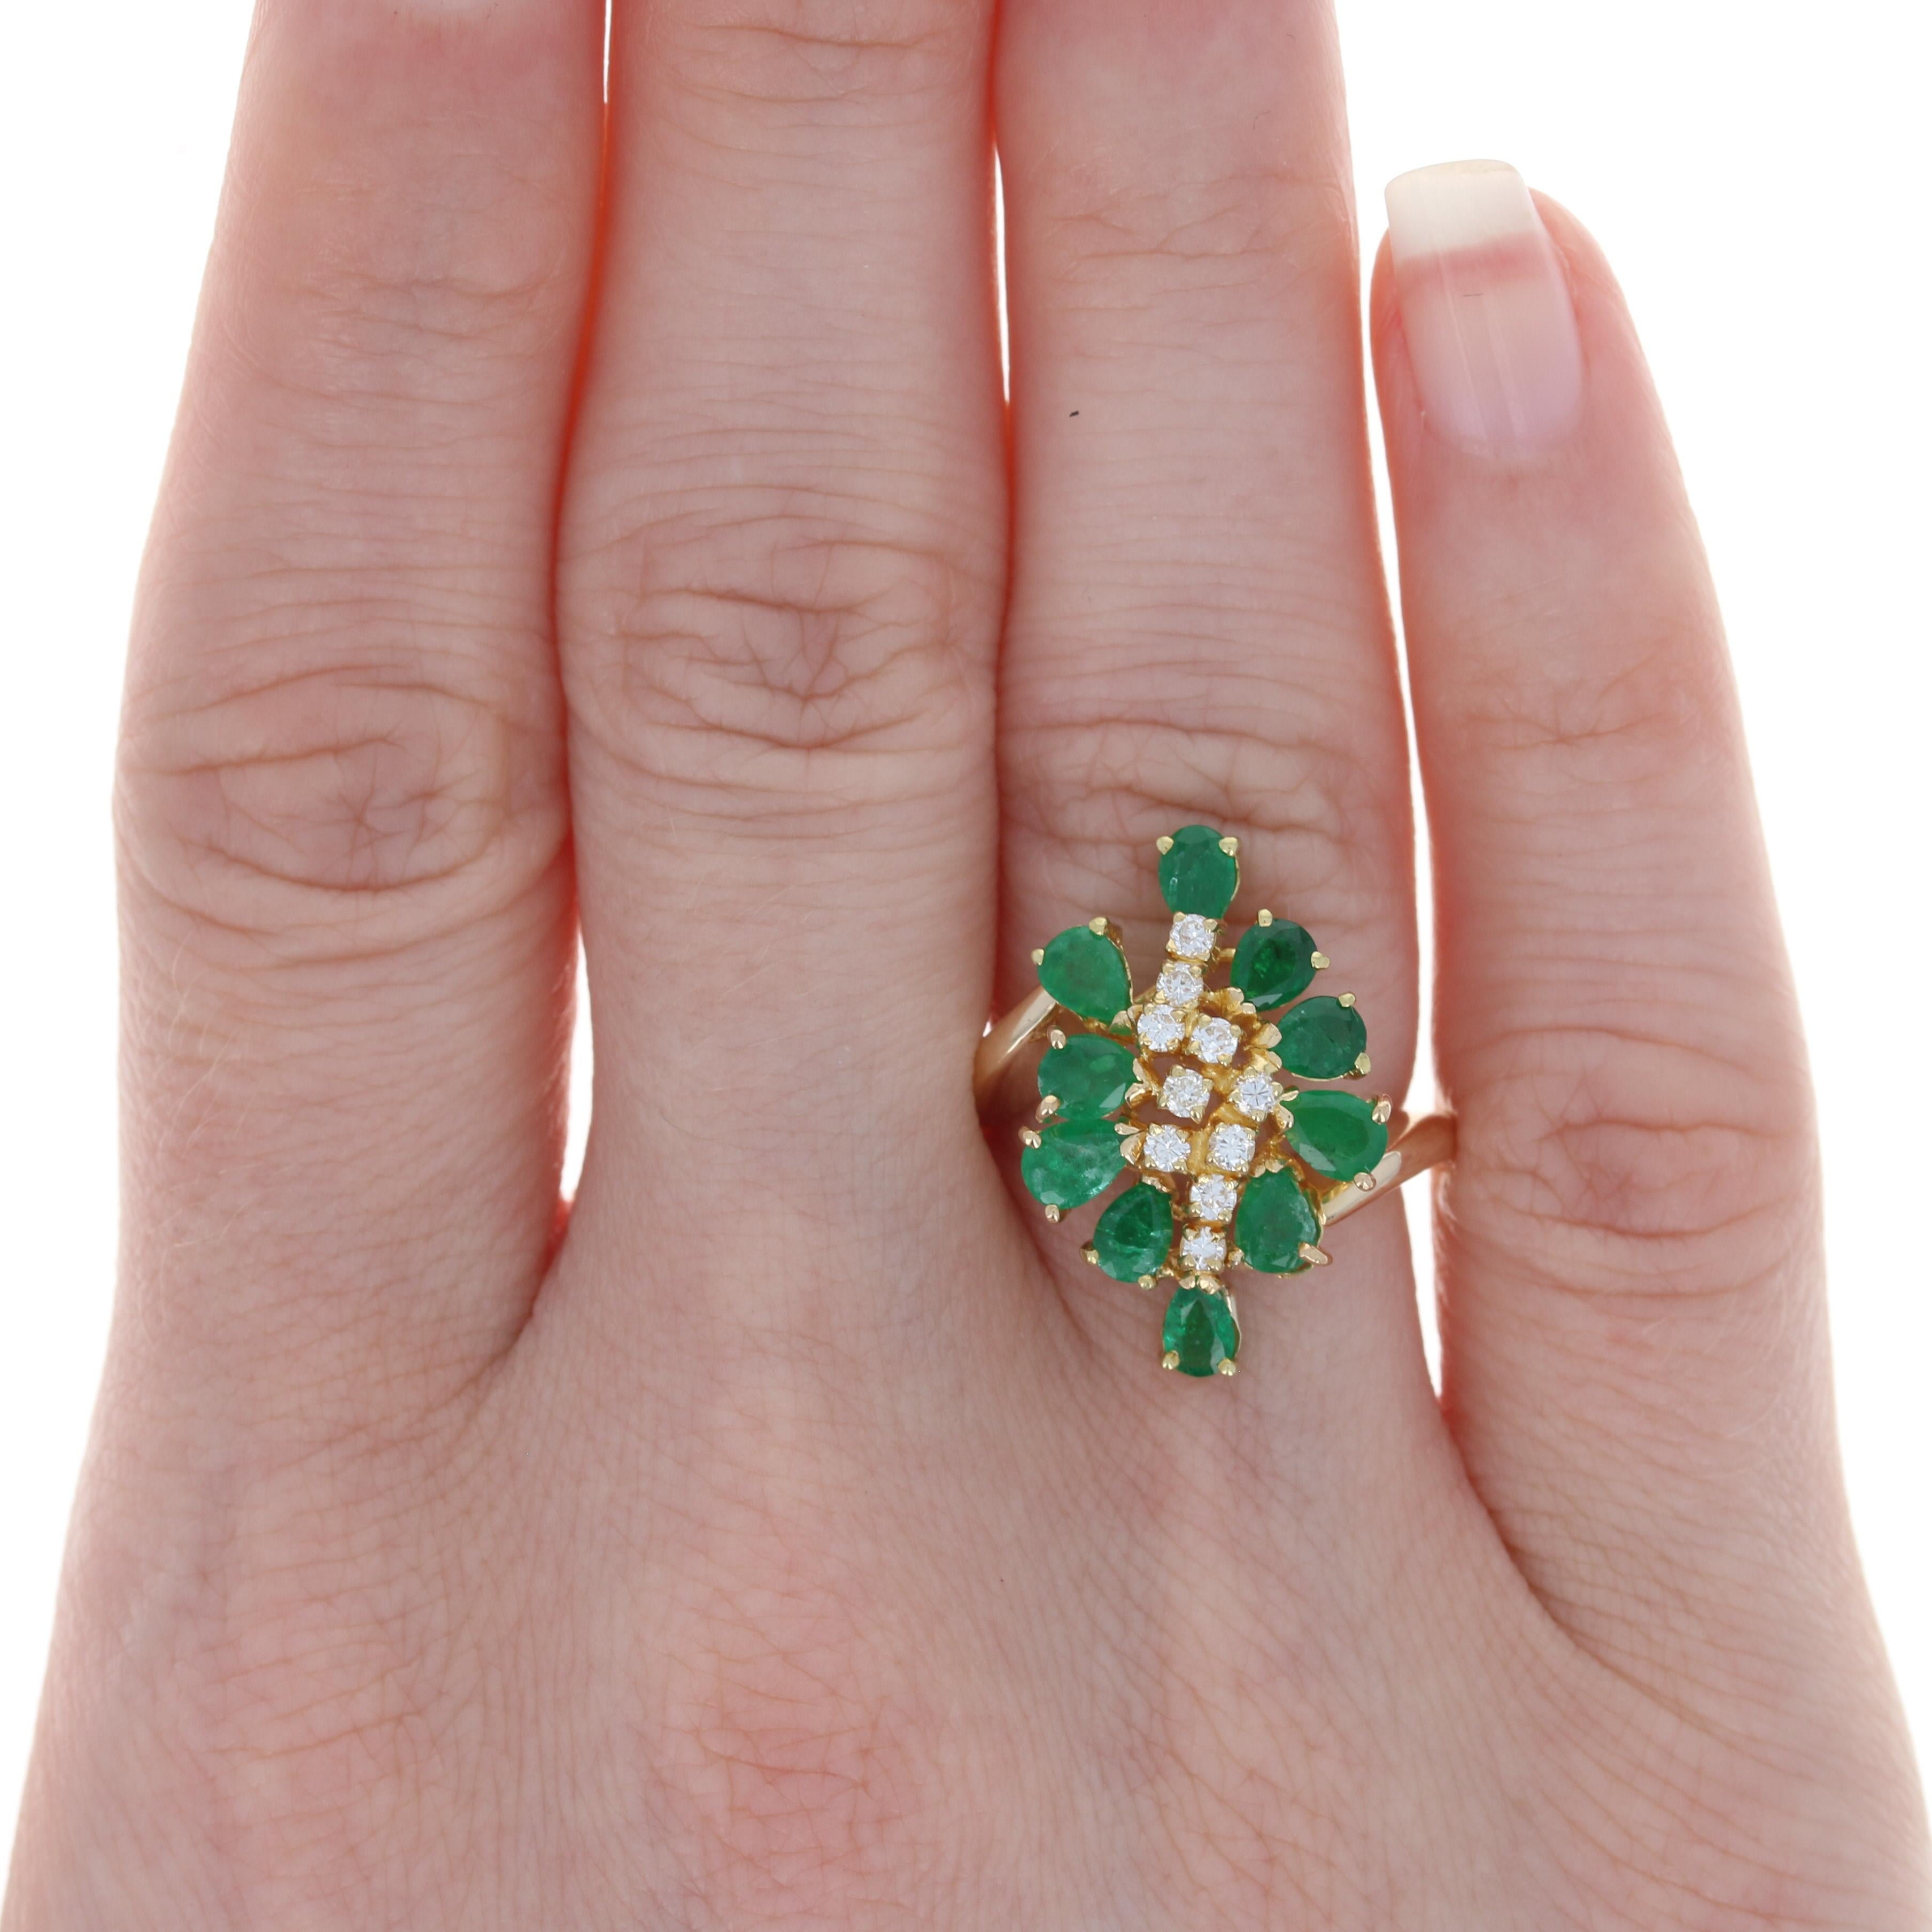 Size: 5 1/2
 Sizing Fee: Down 1 size for a $40 fee or up 2 sizes for a $50 fee
 
 Metal Content: 18k Yellow Gold
 
 Stone Information: 
 Genuine Emeralds
 Treatment: Oiling
 Carat(s): 2.50ctw
 Cut: Pear
 Color: Green
 
 Natural Diamonds
 Carat(s):